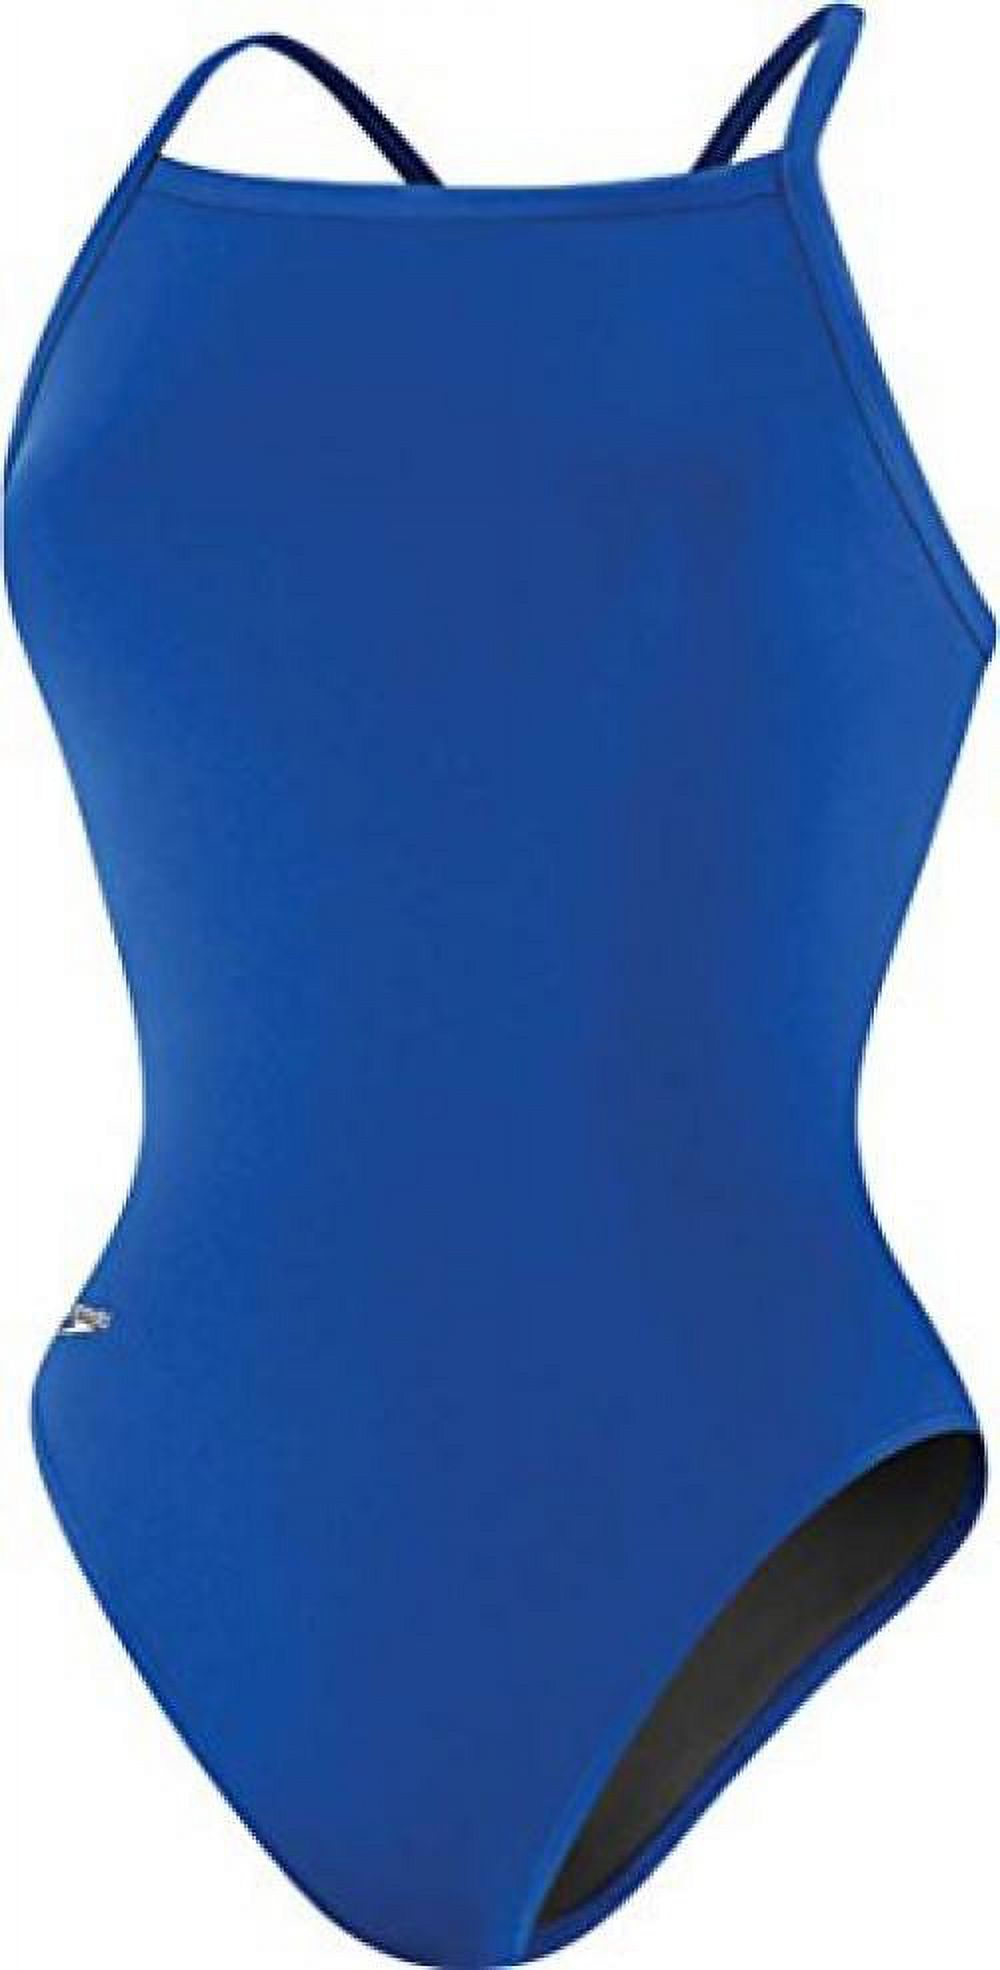 Speedo 819016 Womens Solid Endurance Flyback Training Suit, Sapphire, 28 - image 1 of 2